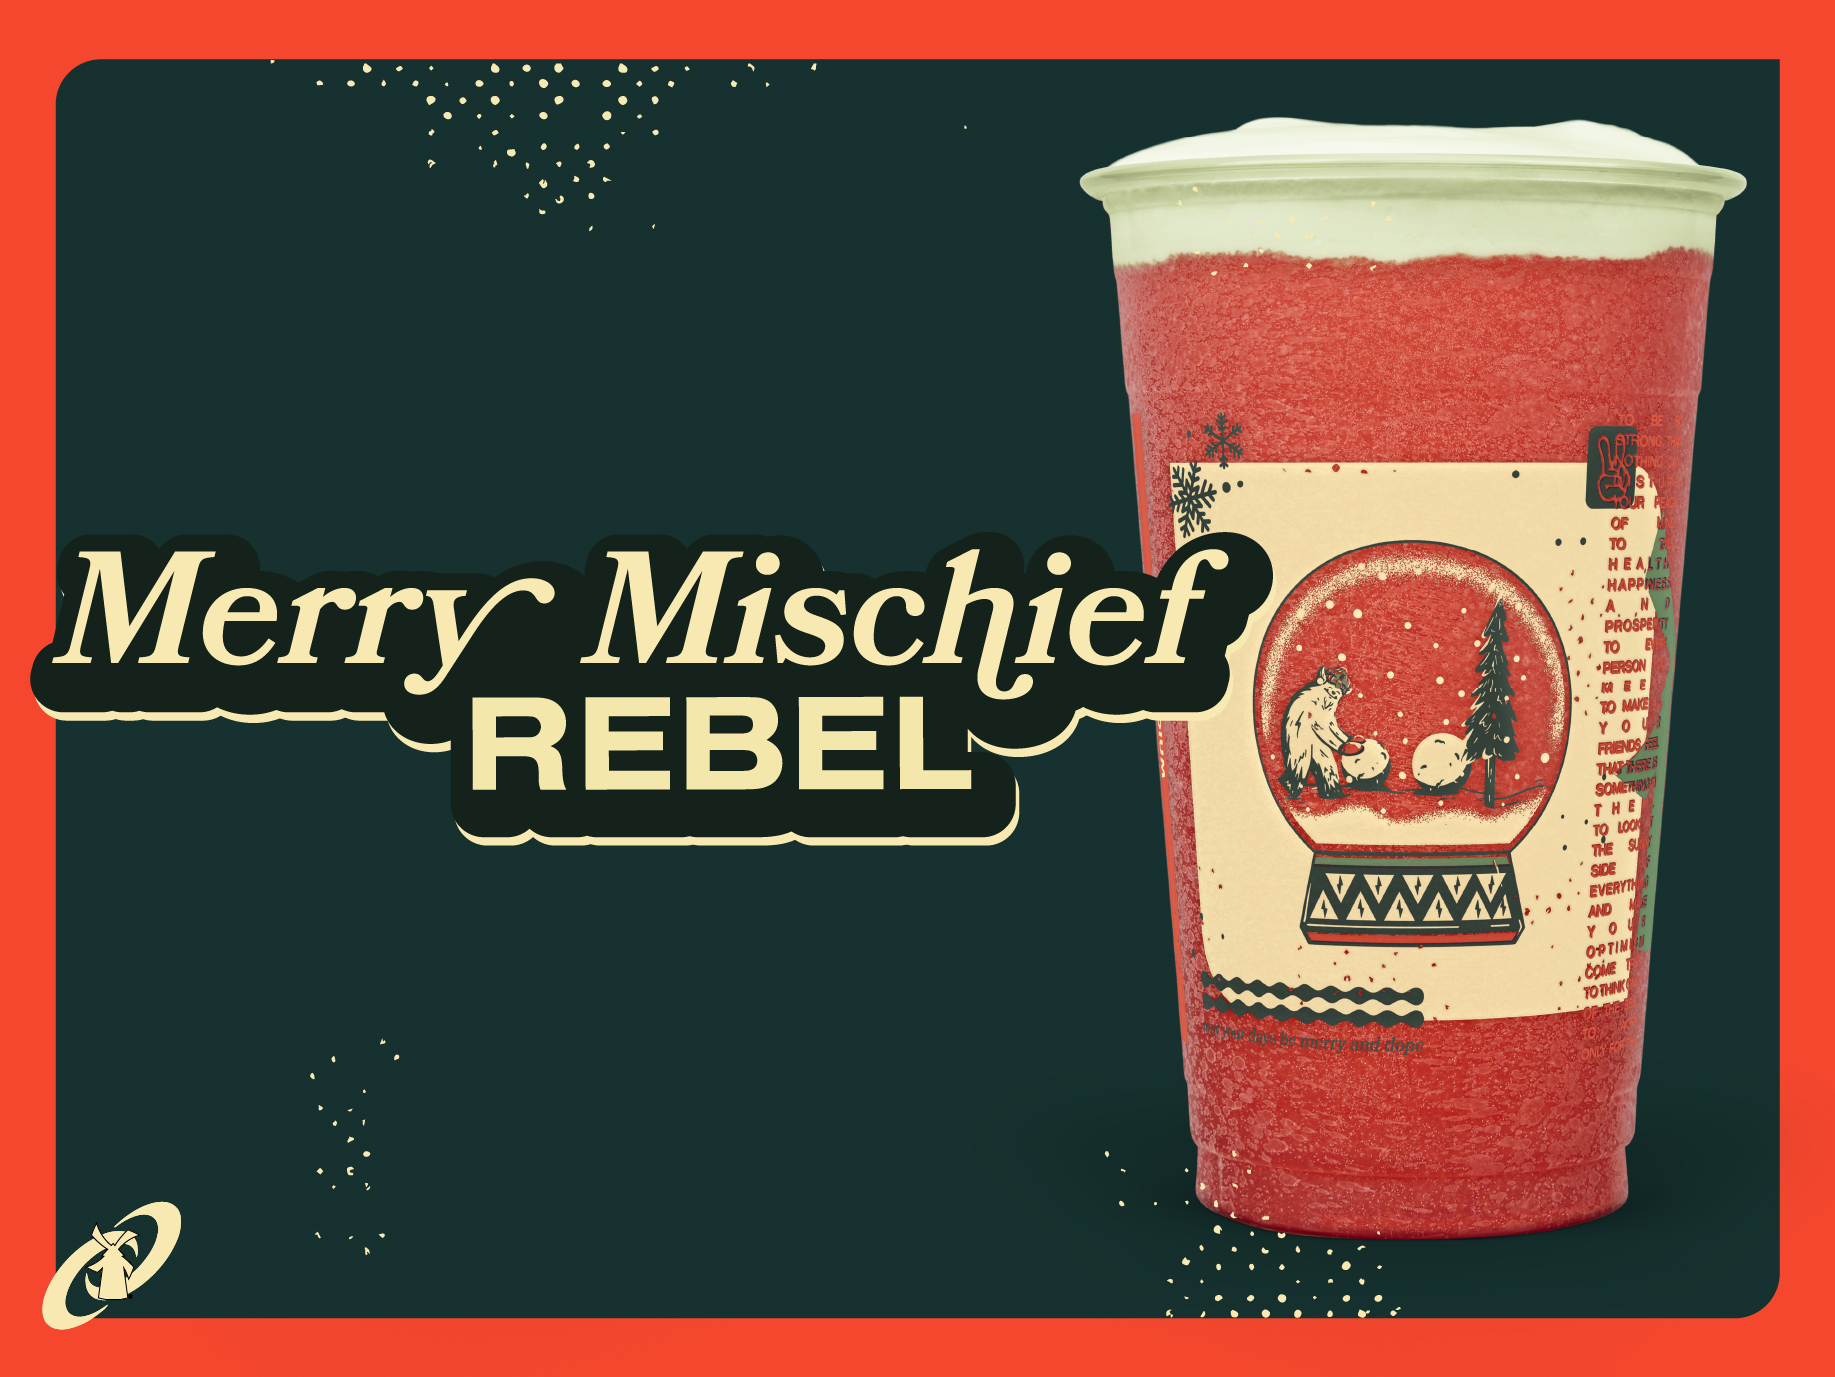 Merry Mischief Rebel: The Merry Mischief Rebel features strawberry and red raspberry flavors in Dutch Bros’ exclusive energy drink, Rebel, topped with NEW Green Apple Soft Top.